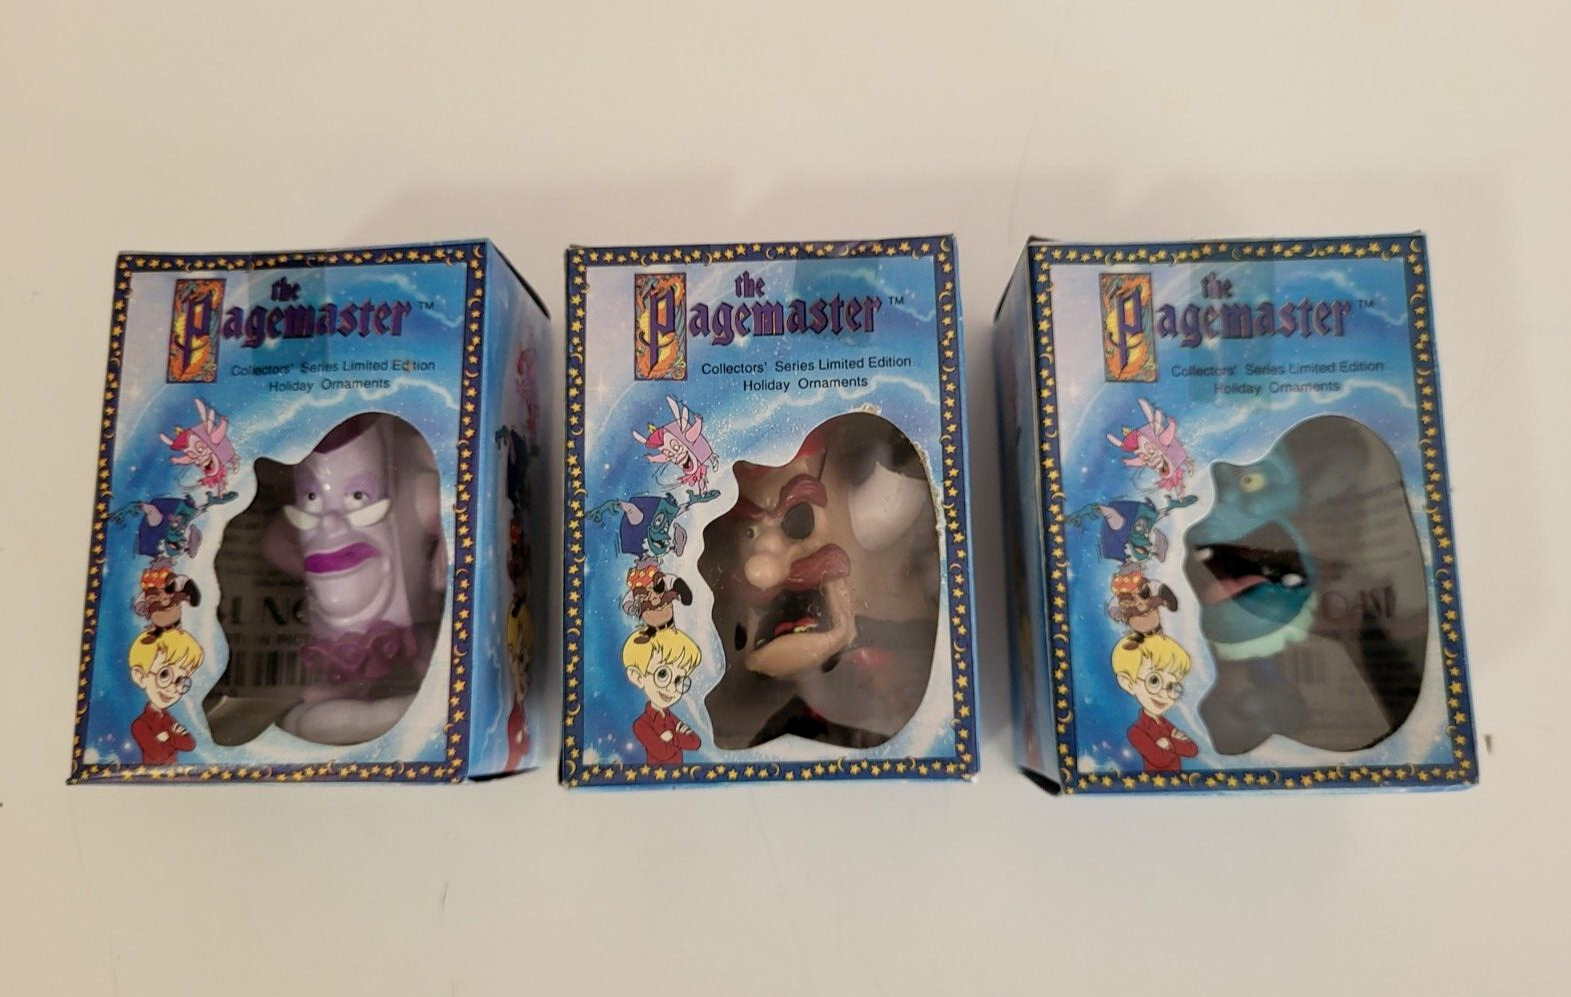 Set of 3 The Pagemaster Collectors Series Limited Edition Holiday Ornaments 1994